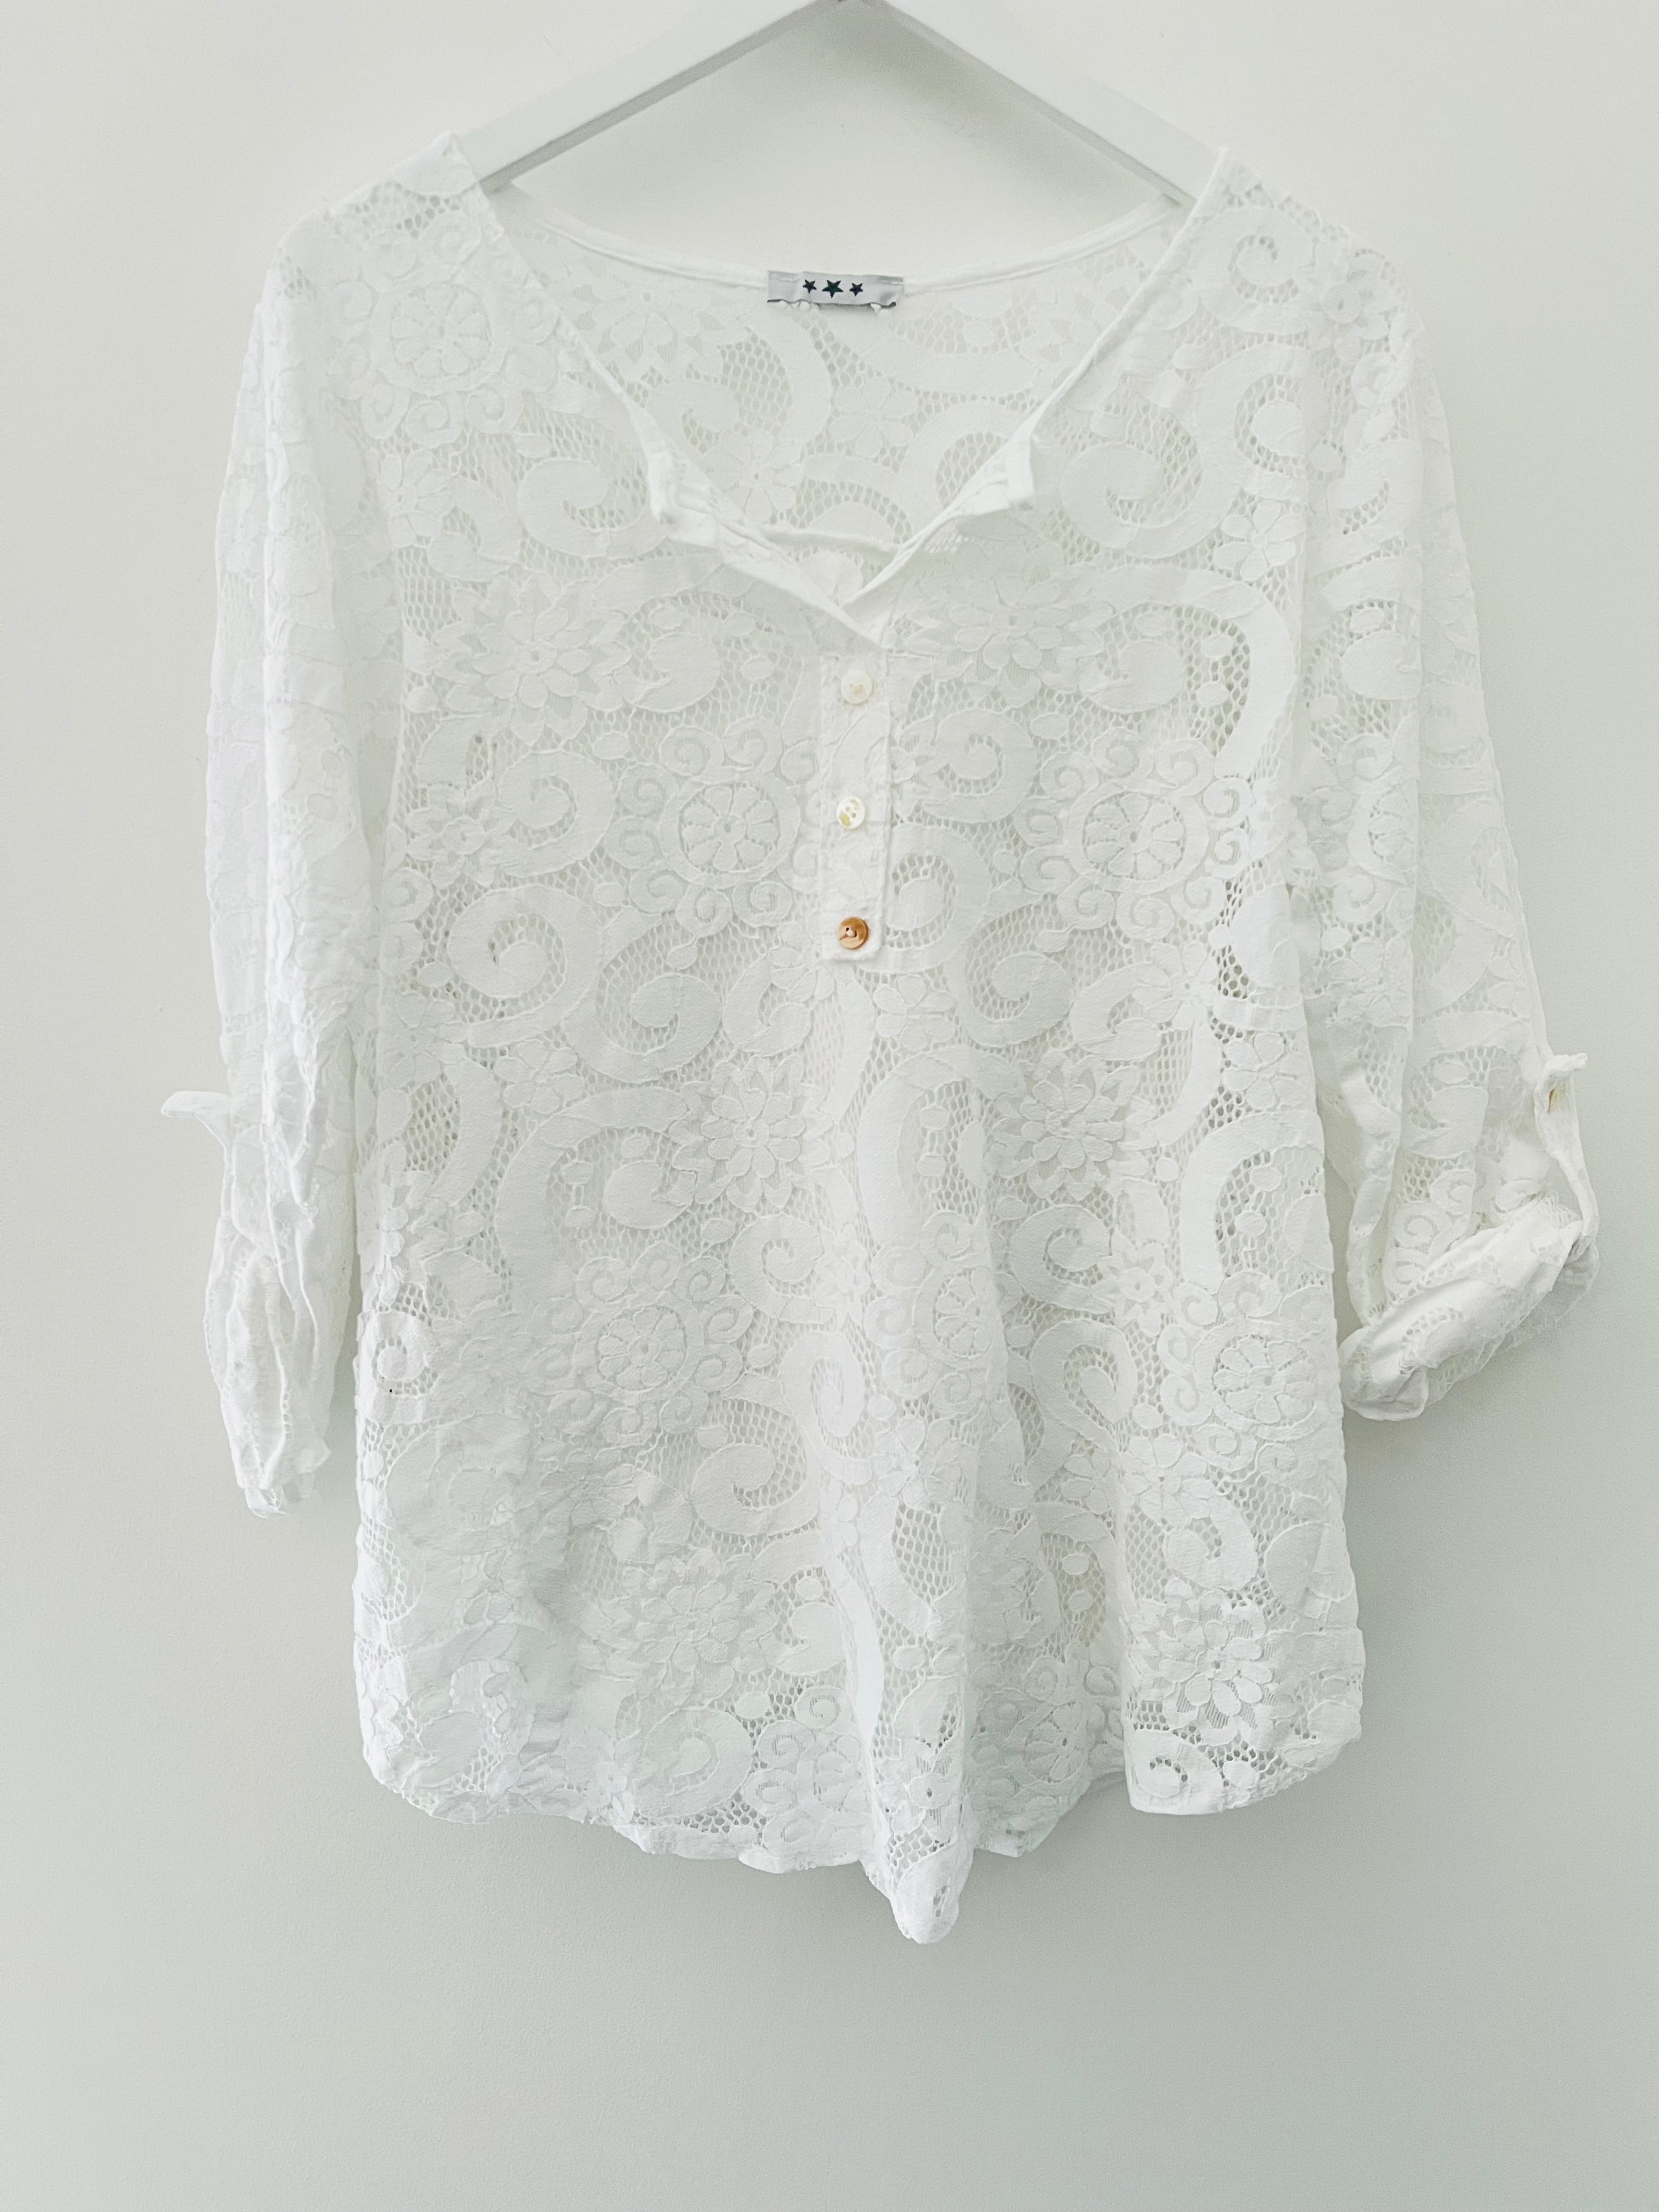 Lace Blouse & Camisole in White